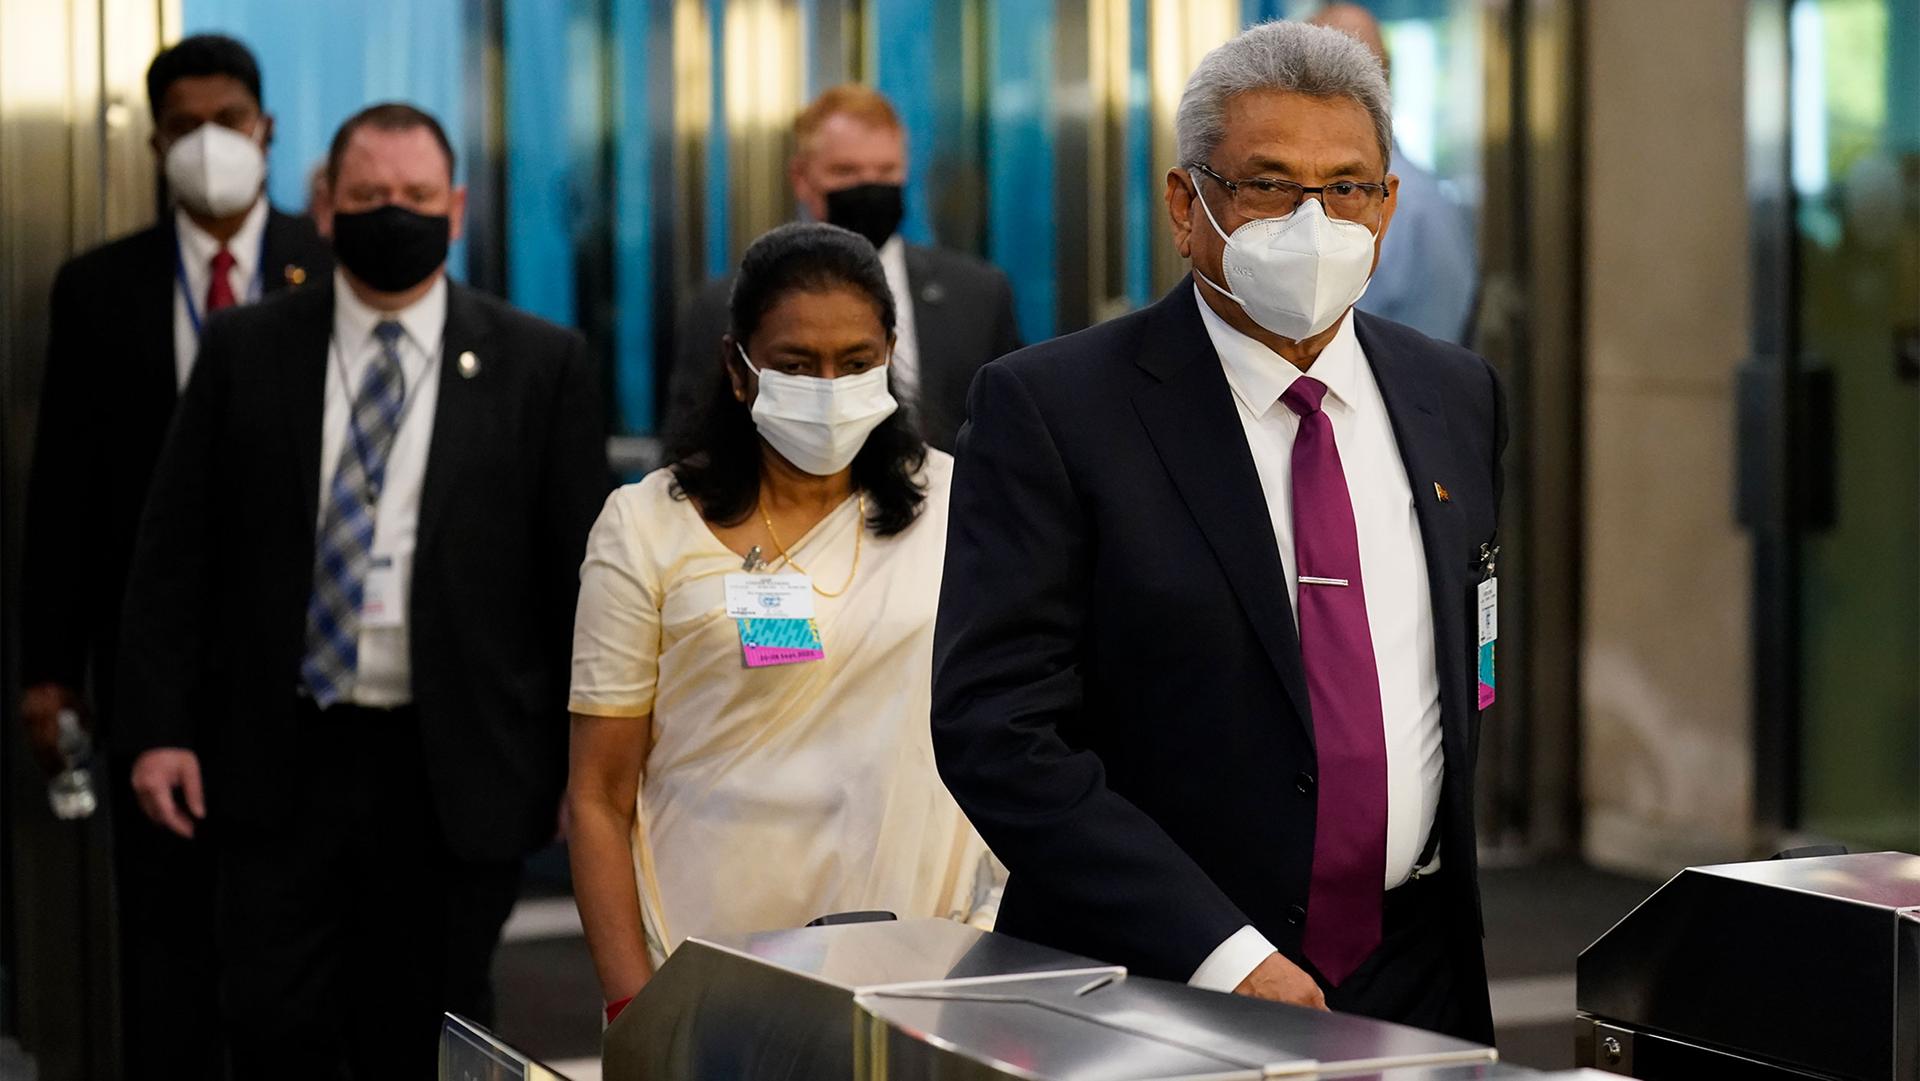 Gotabaya Rajapaksa, president of Sri Lanka, right, arrives at United Nations headquarters, during the 76th Session of the UN General Assembly in New York